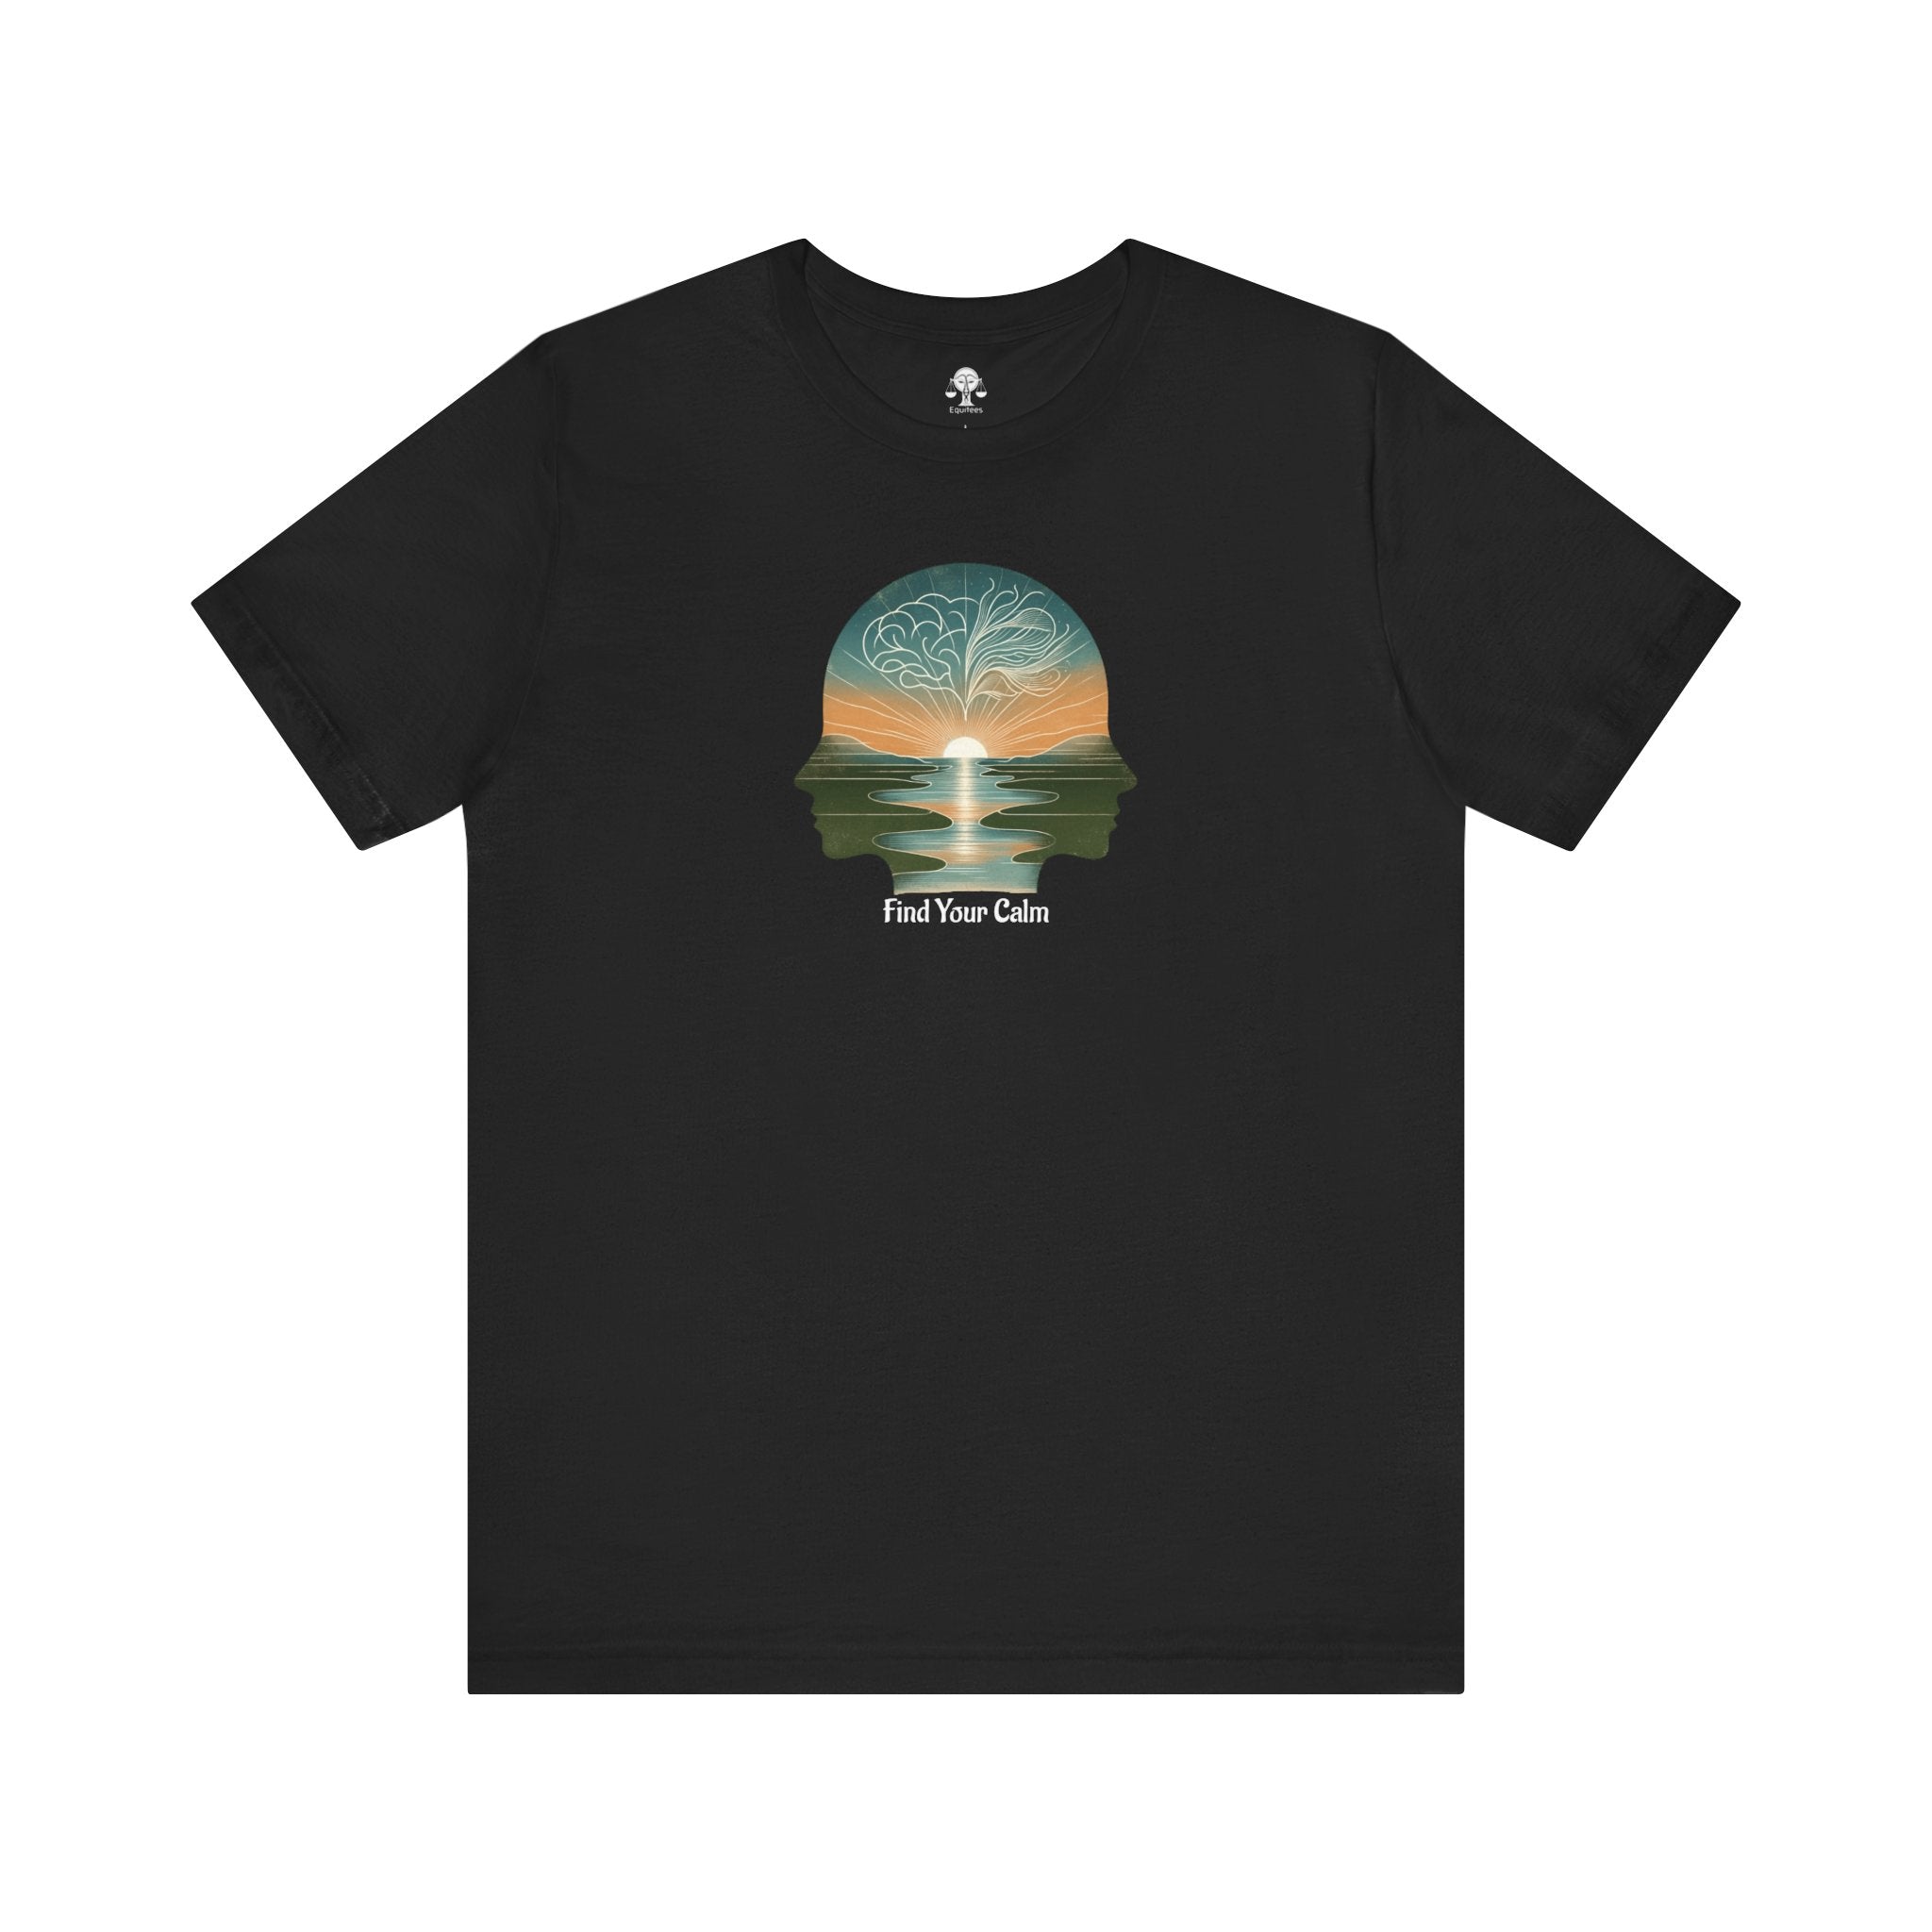 Find Your Calm Tee Shirt